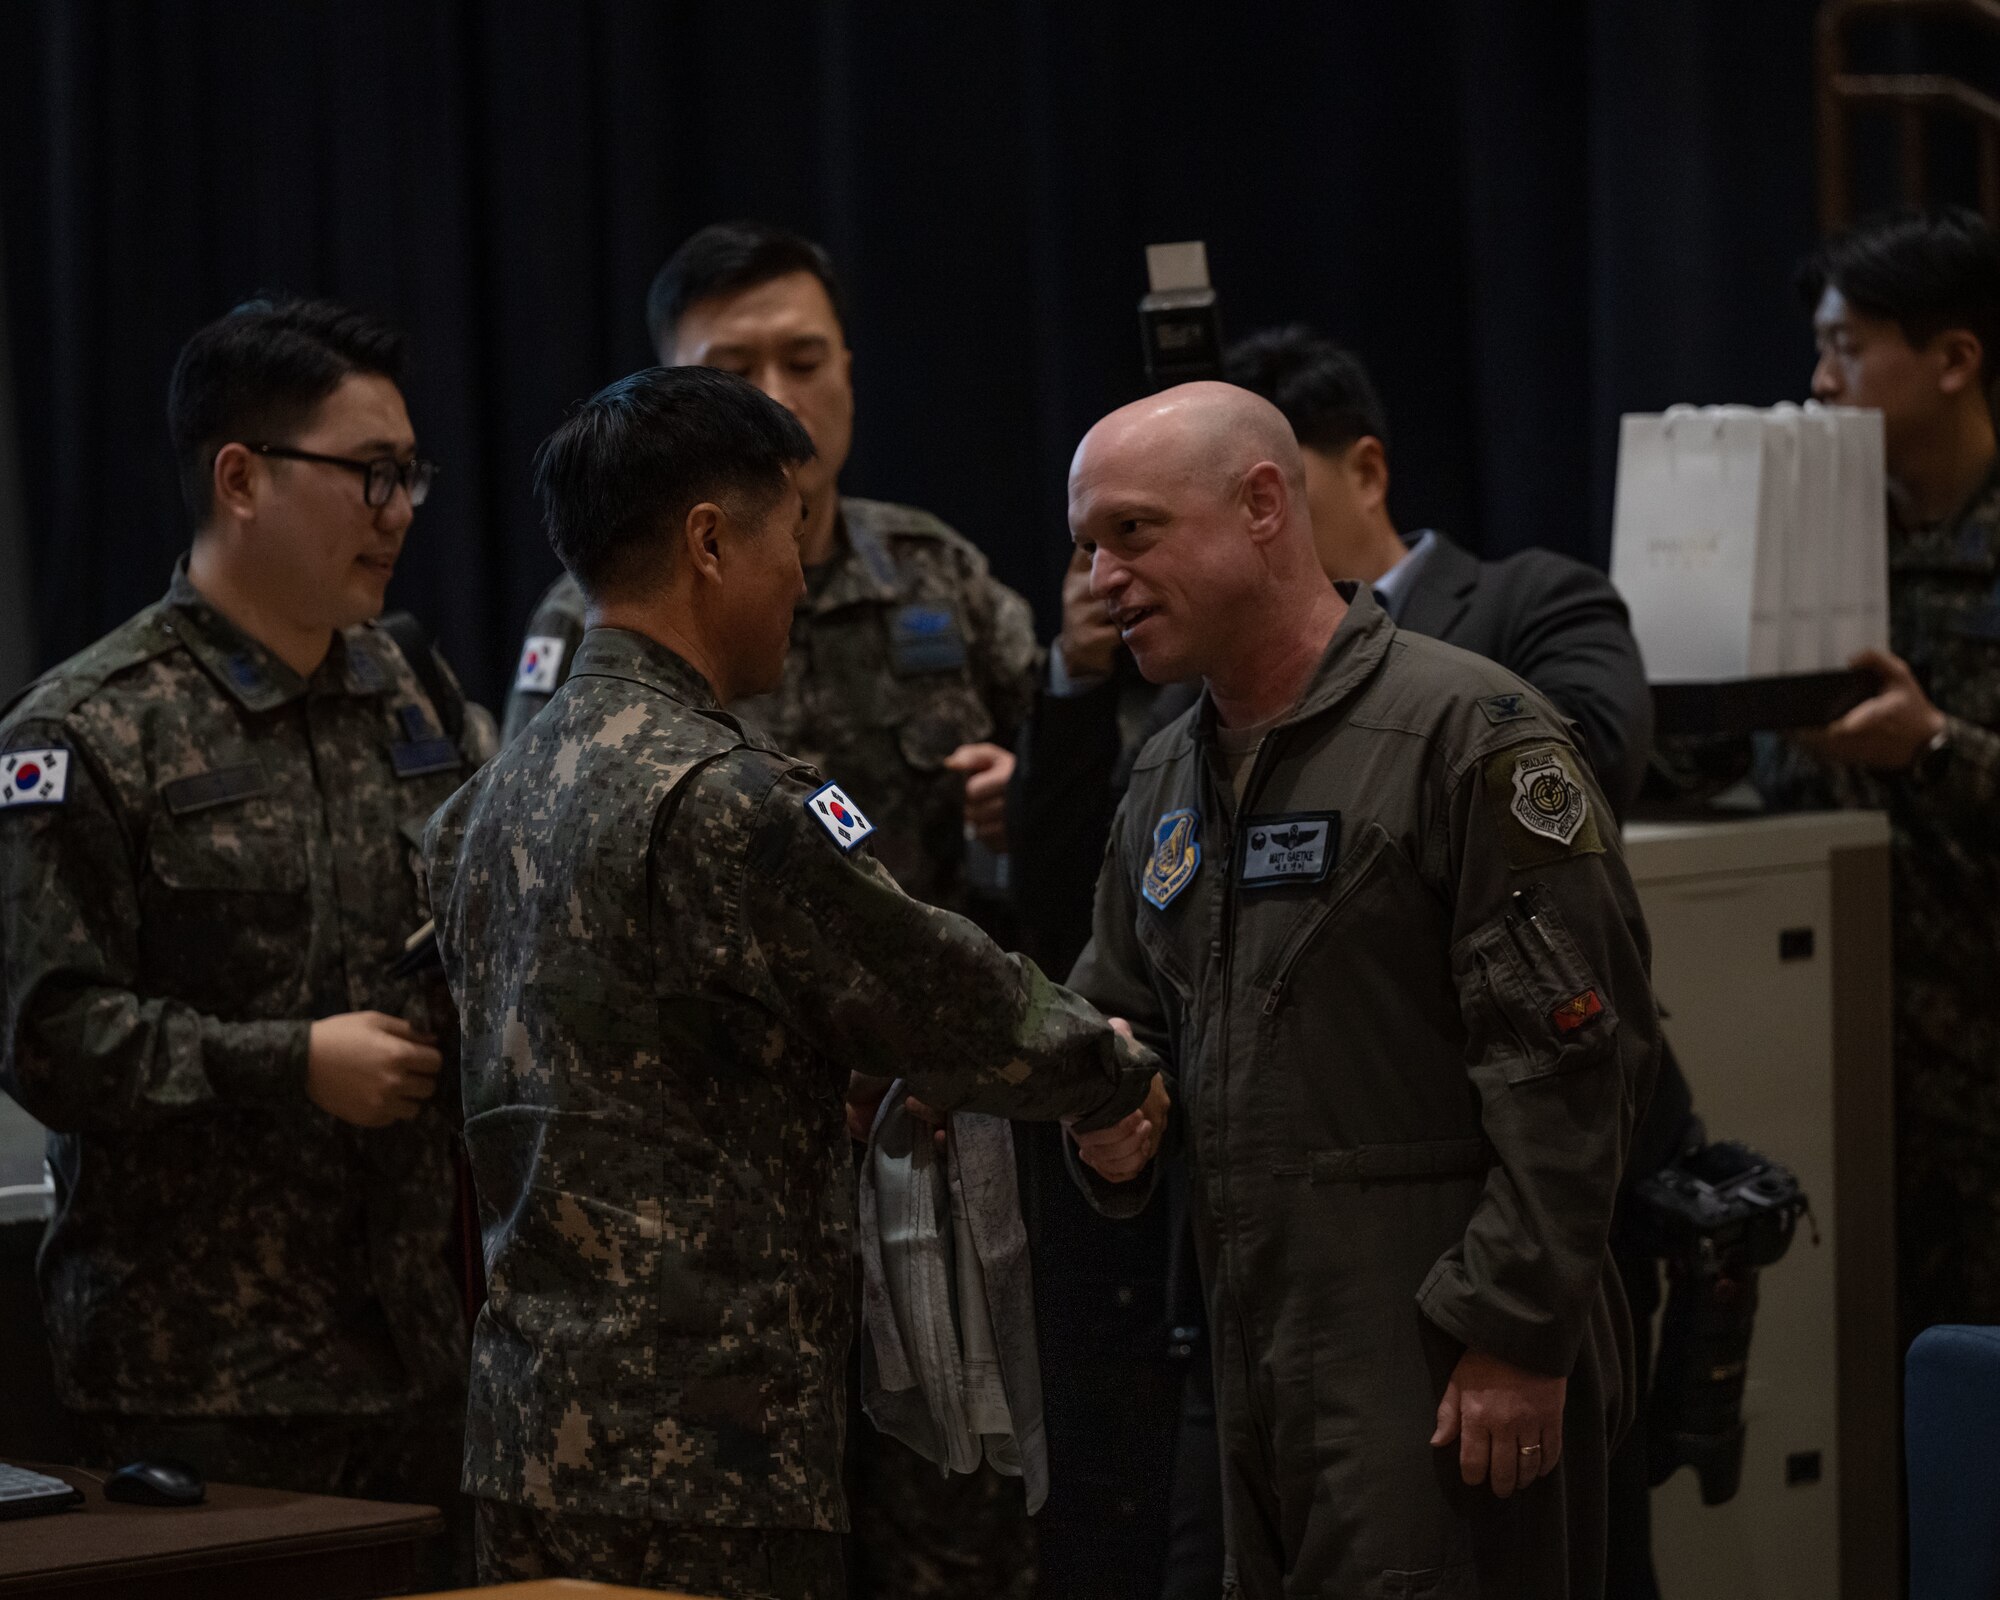 Republic of Korea Air Force Chief of Staff Gen. Lee, Young Su greets U.S. Air Force Col. Matthew Gaetke, 8th Fighter Wing commander, after speaking to personnel at Kunsan Air Base, ROK